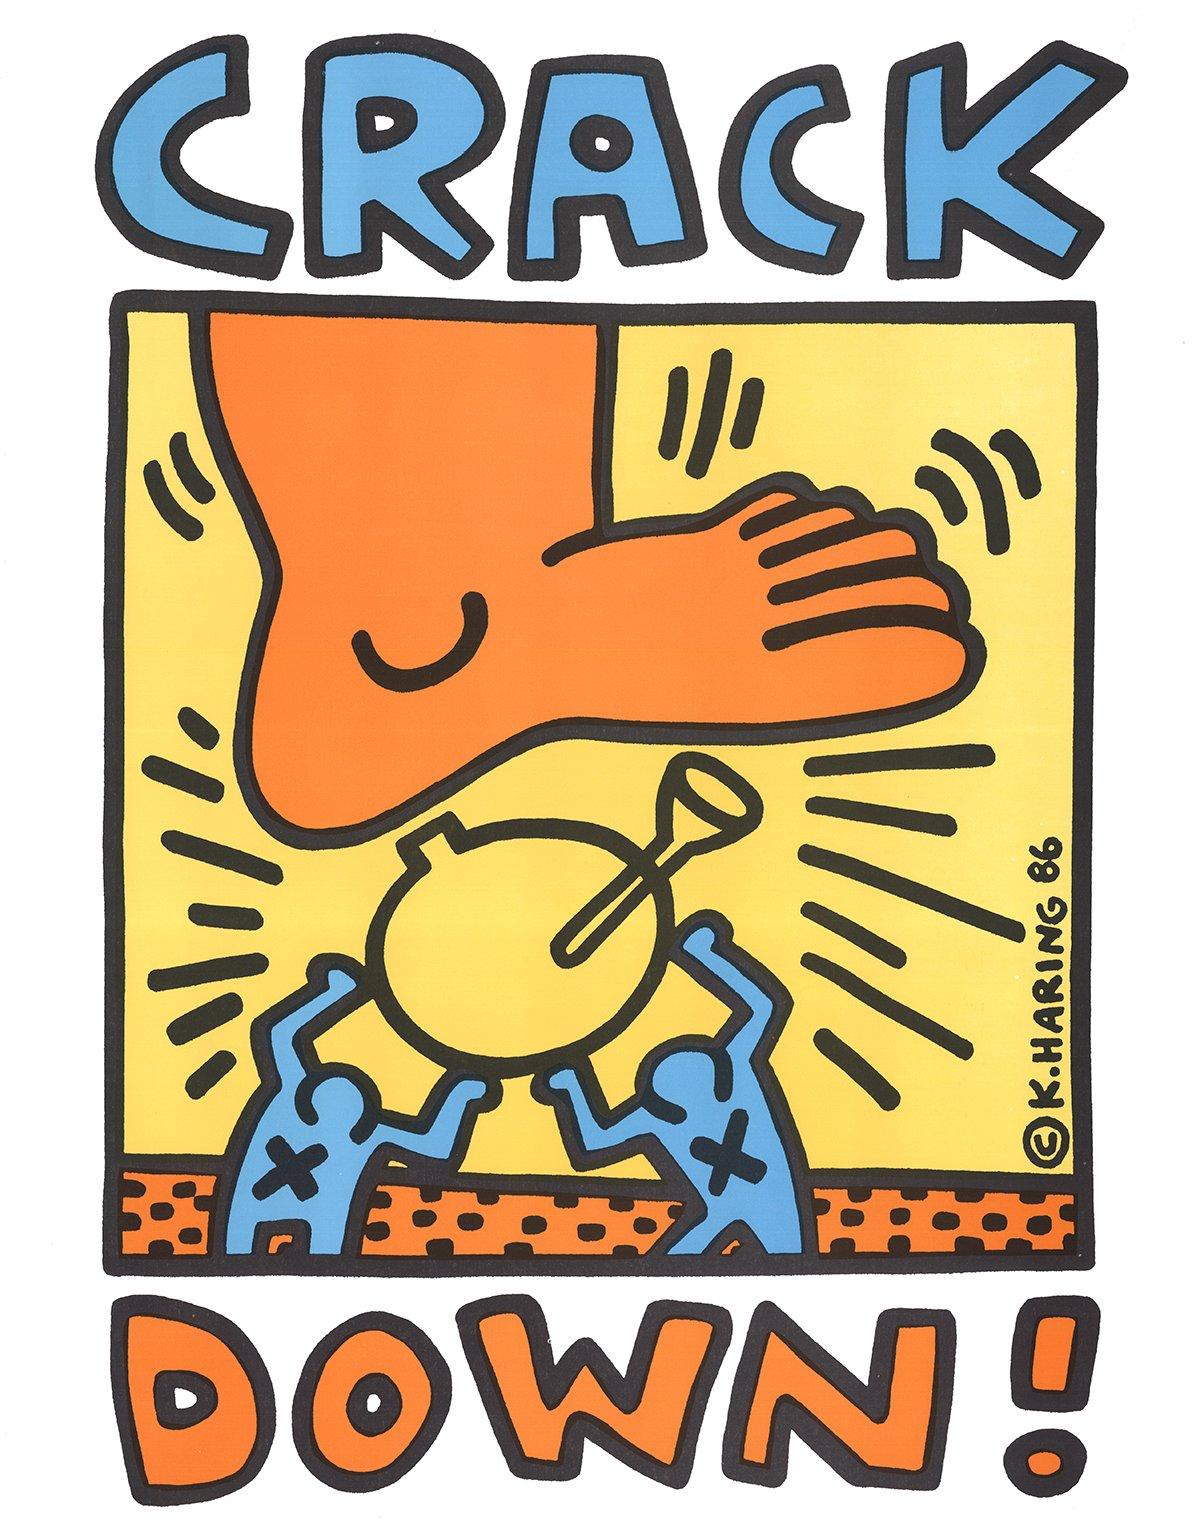 1986 After Keith Haring 'Crack Down' ORIGINAL POSTER